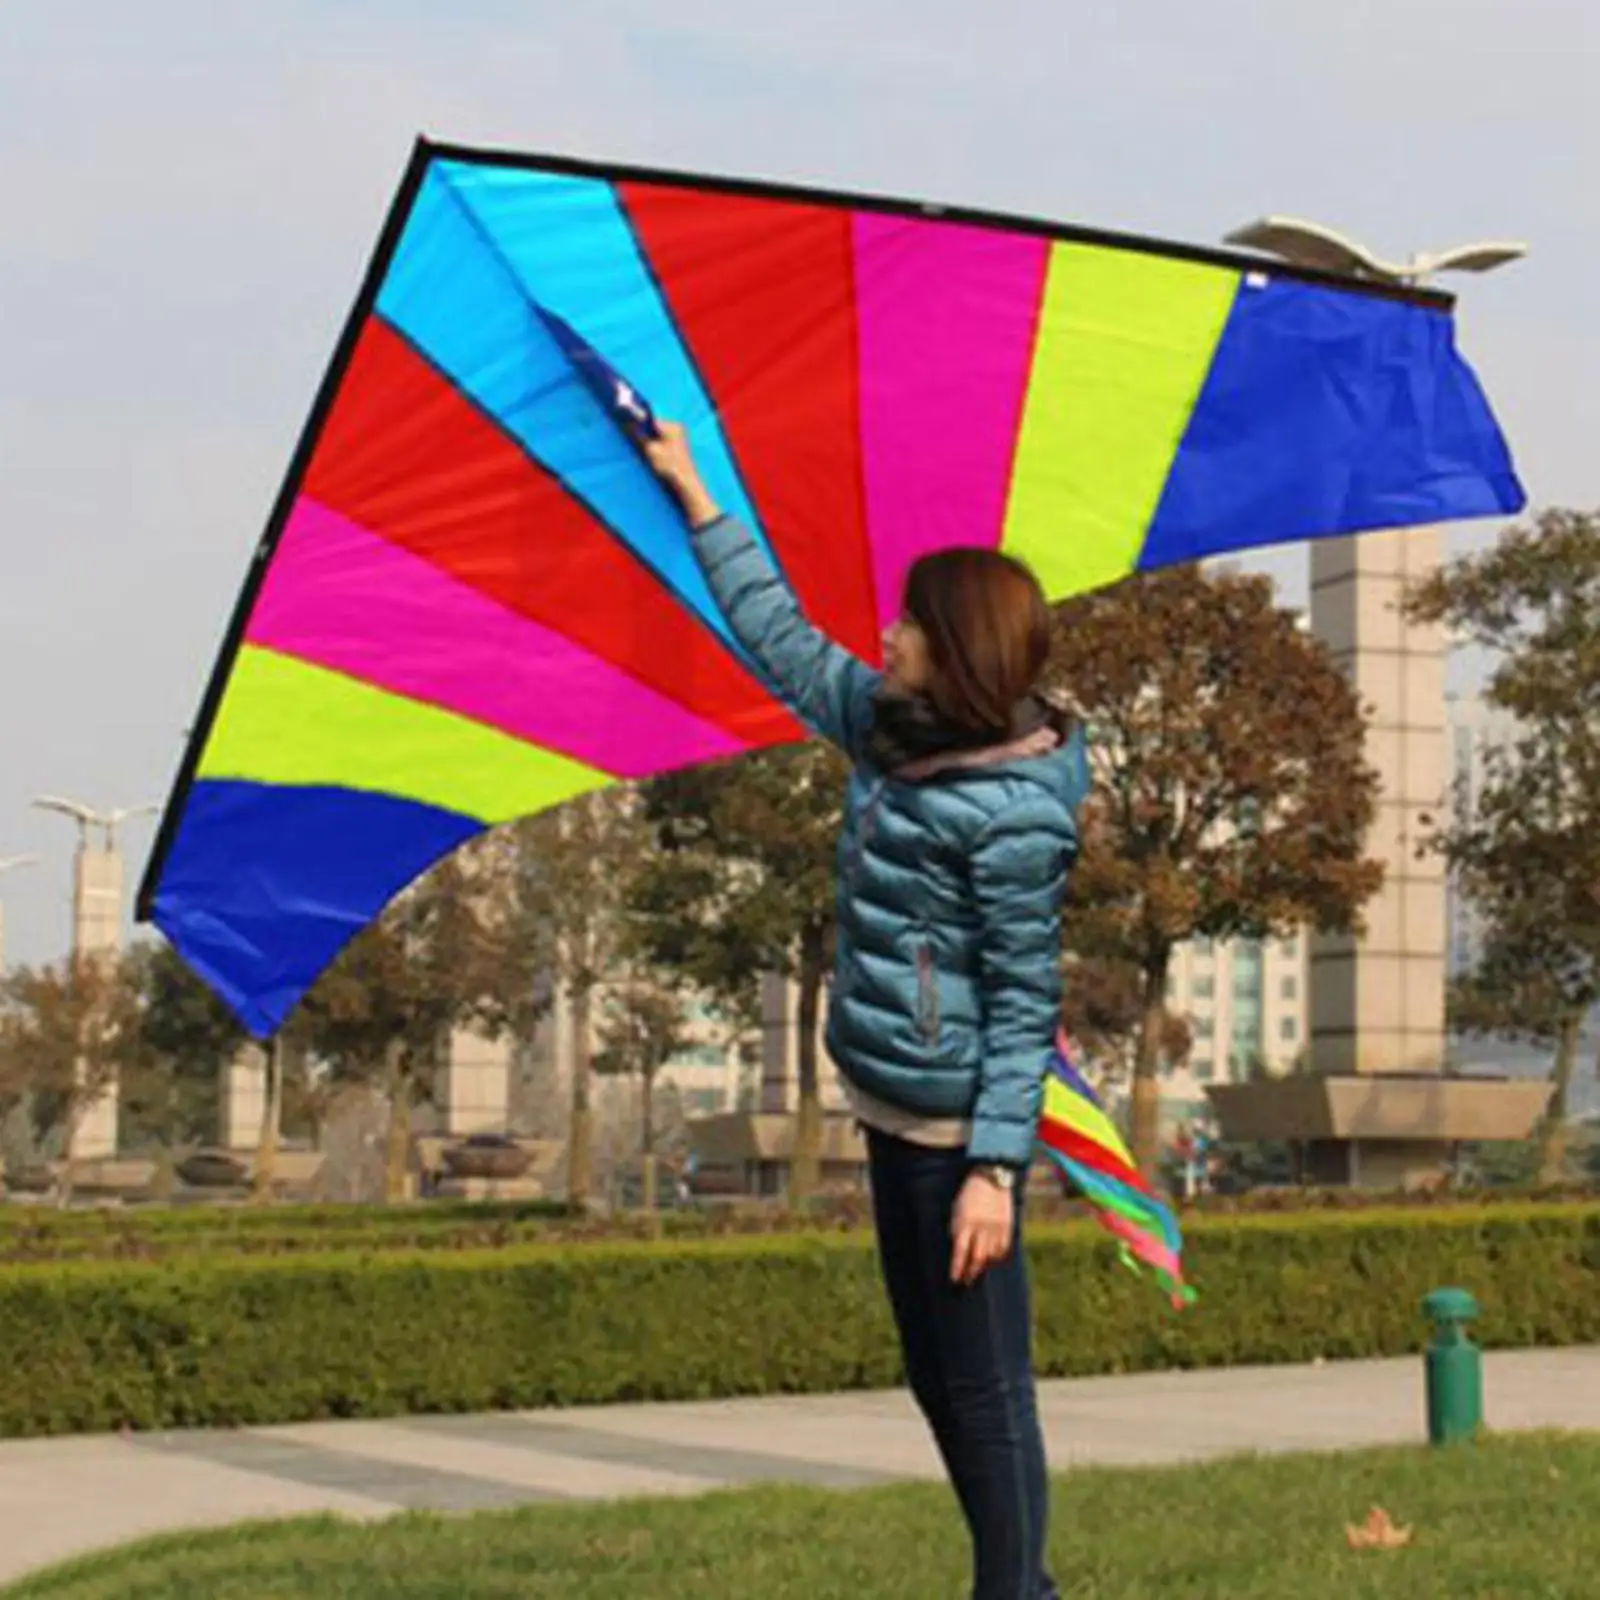 Giant Delta Kite Triangle Kite with Tail Single Line Windsock Vivid for Beach Games Teenagers